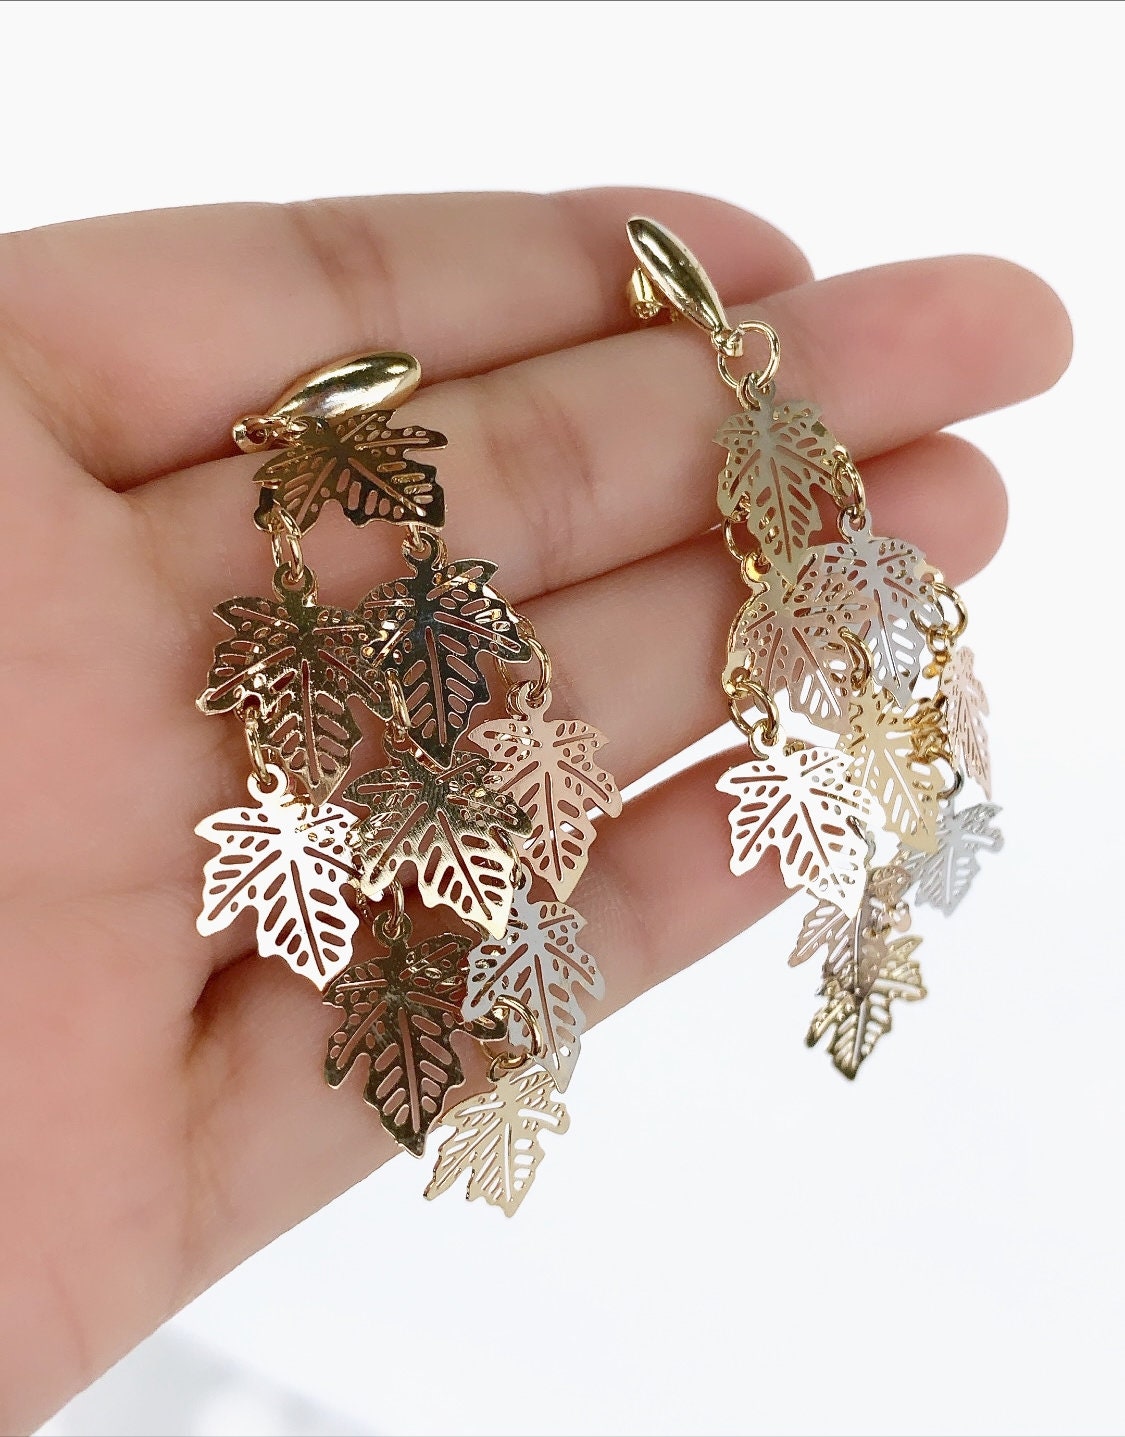 18k Gold Filled Three Tones or Gold Color Leaf Earrings & Pendants Set Wholesale Jewelry Making Supplies